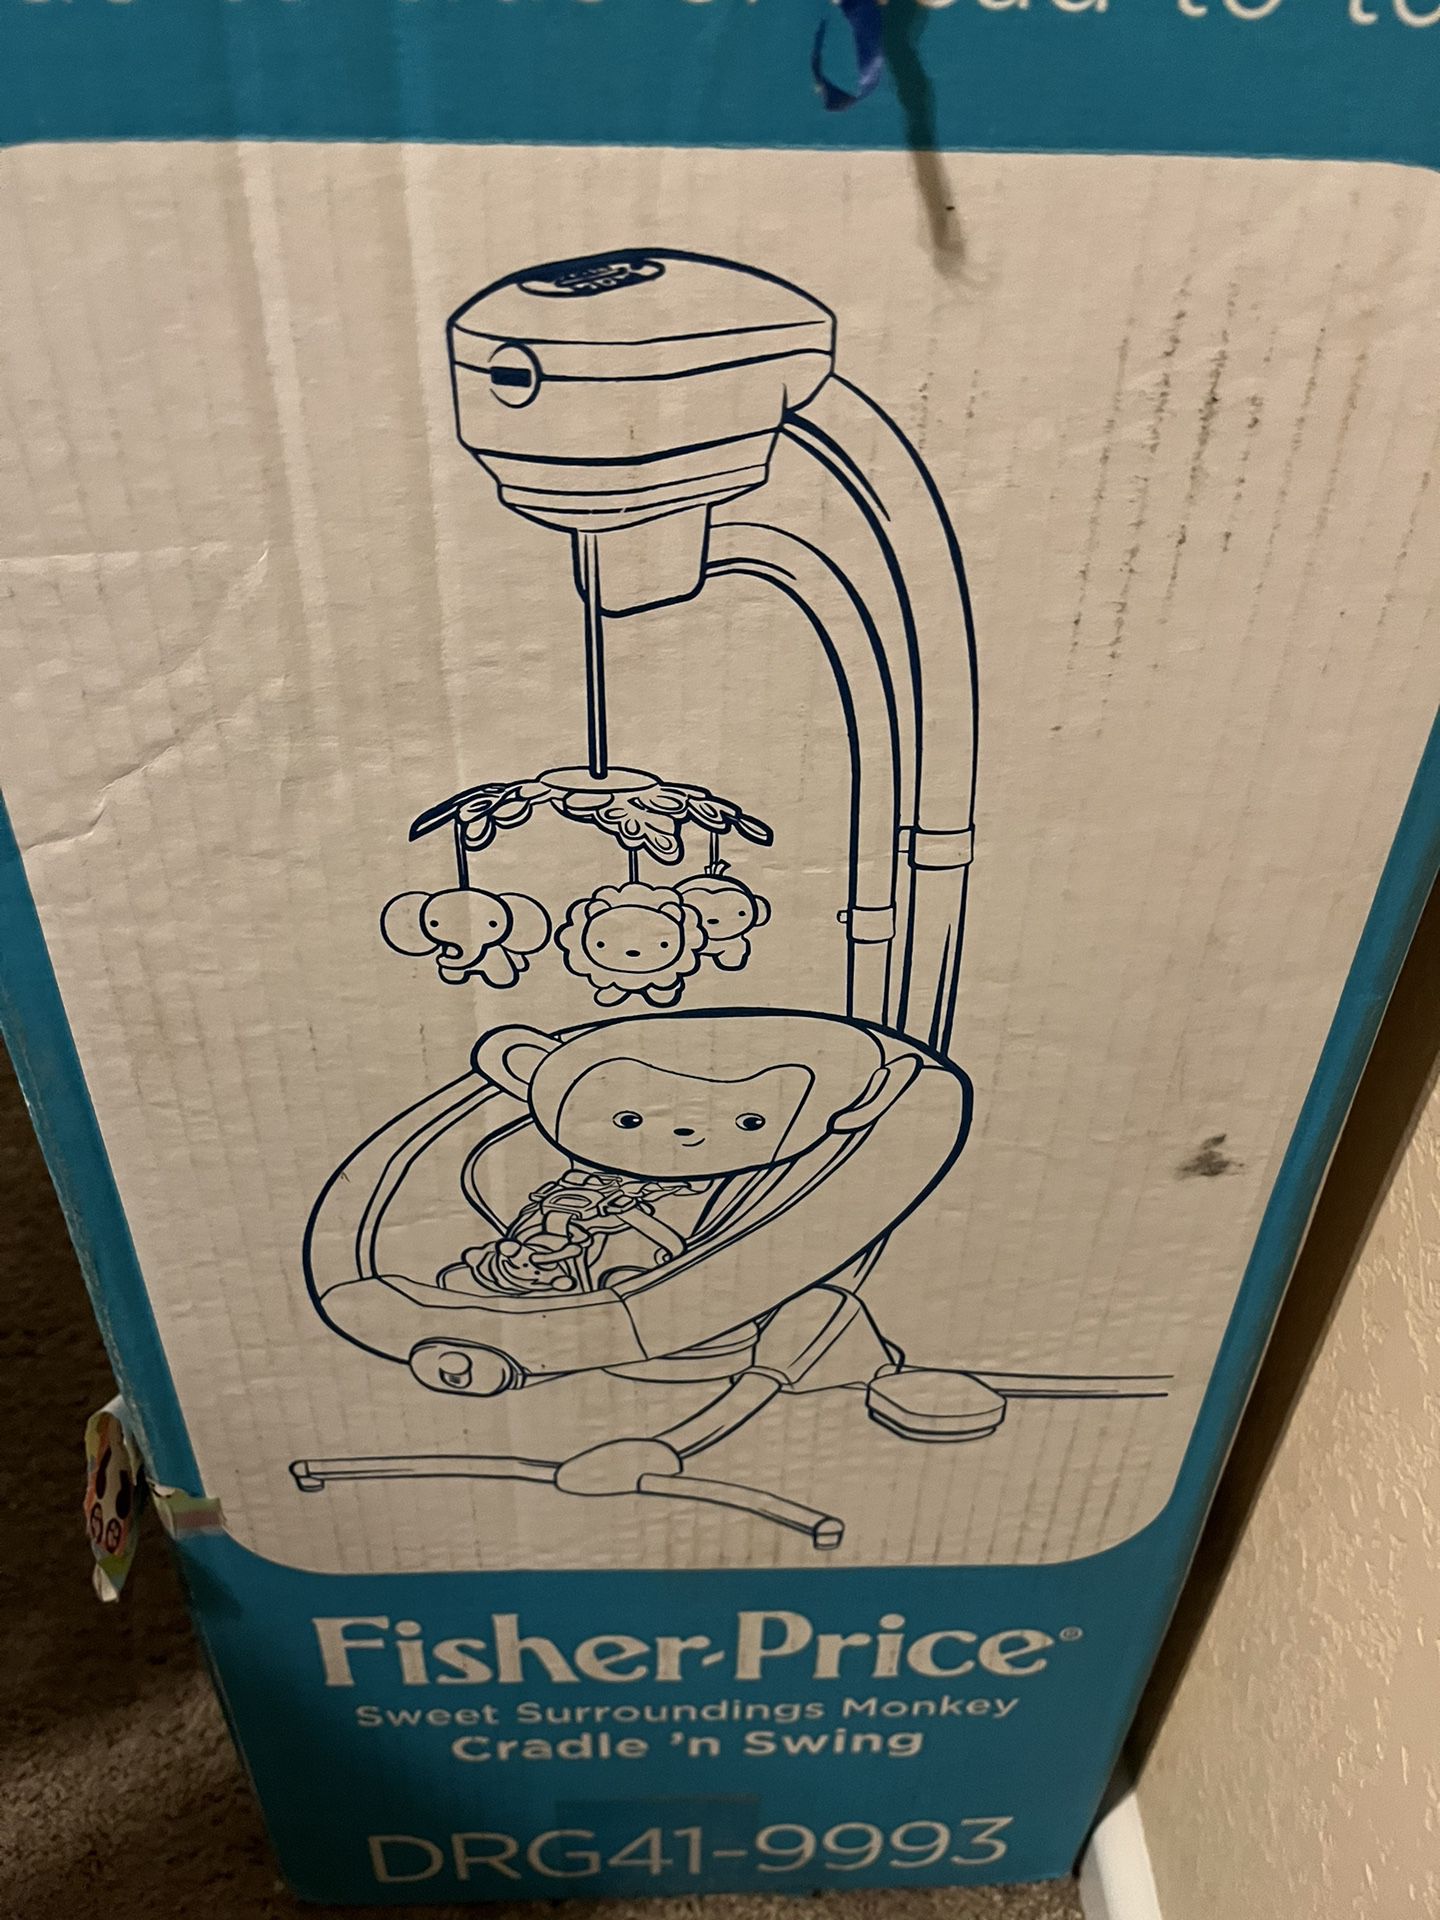 Fisher Price Craddle Swing